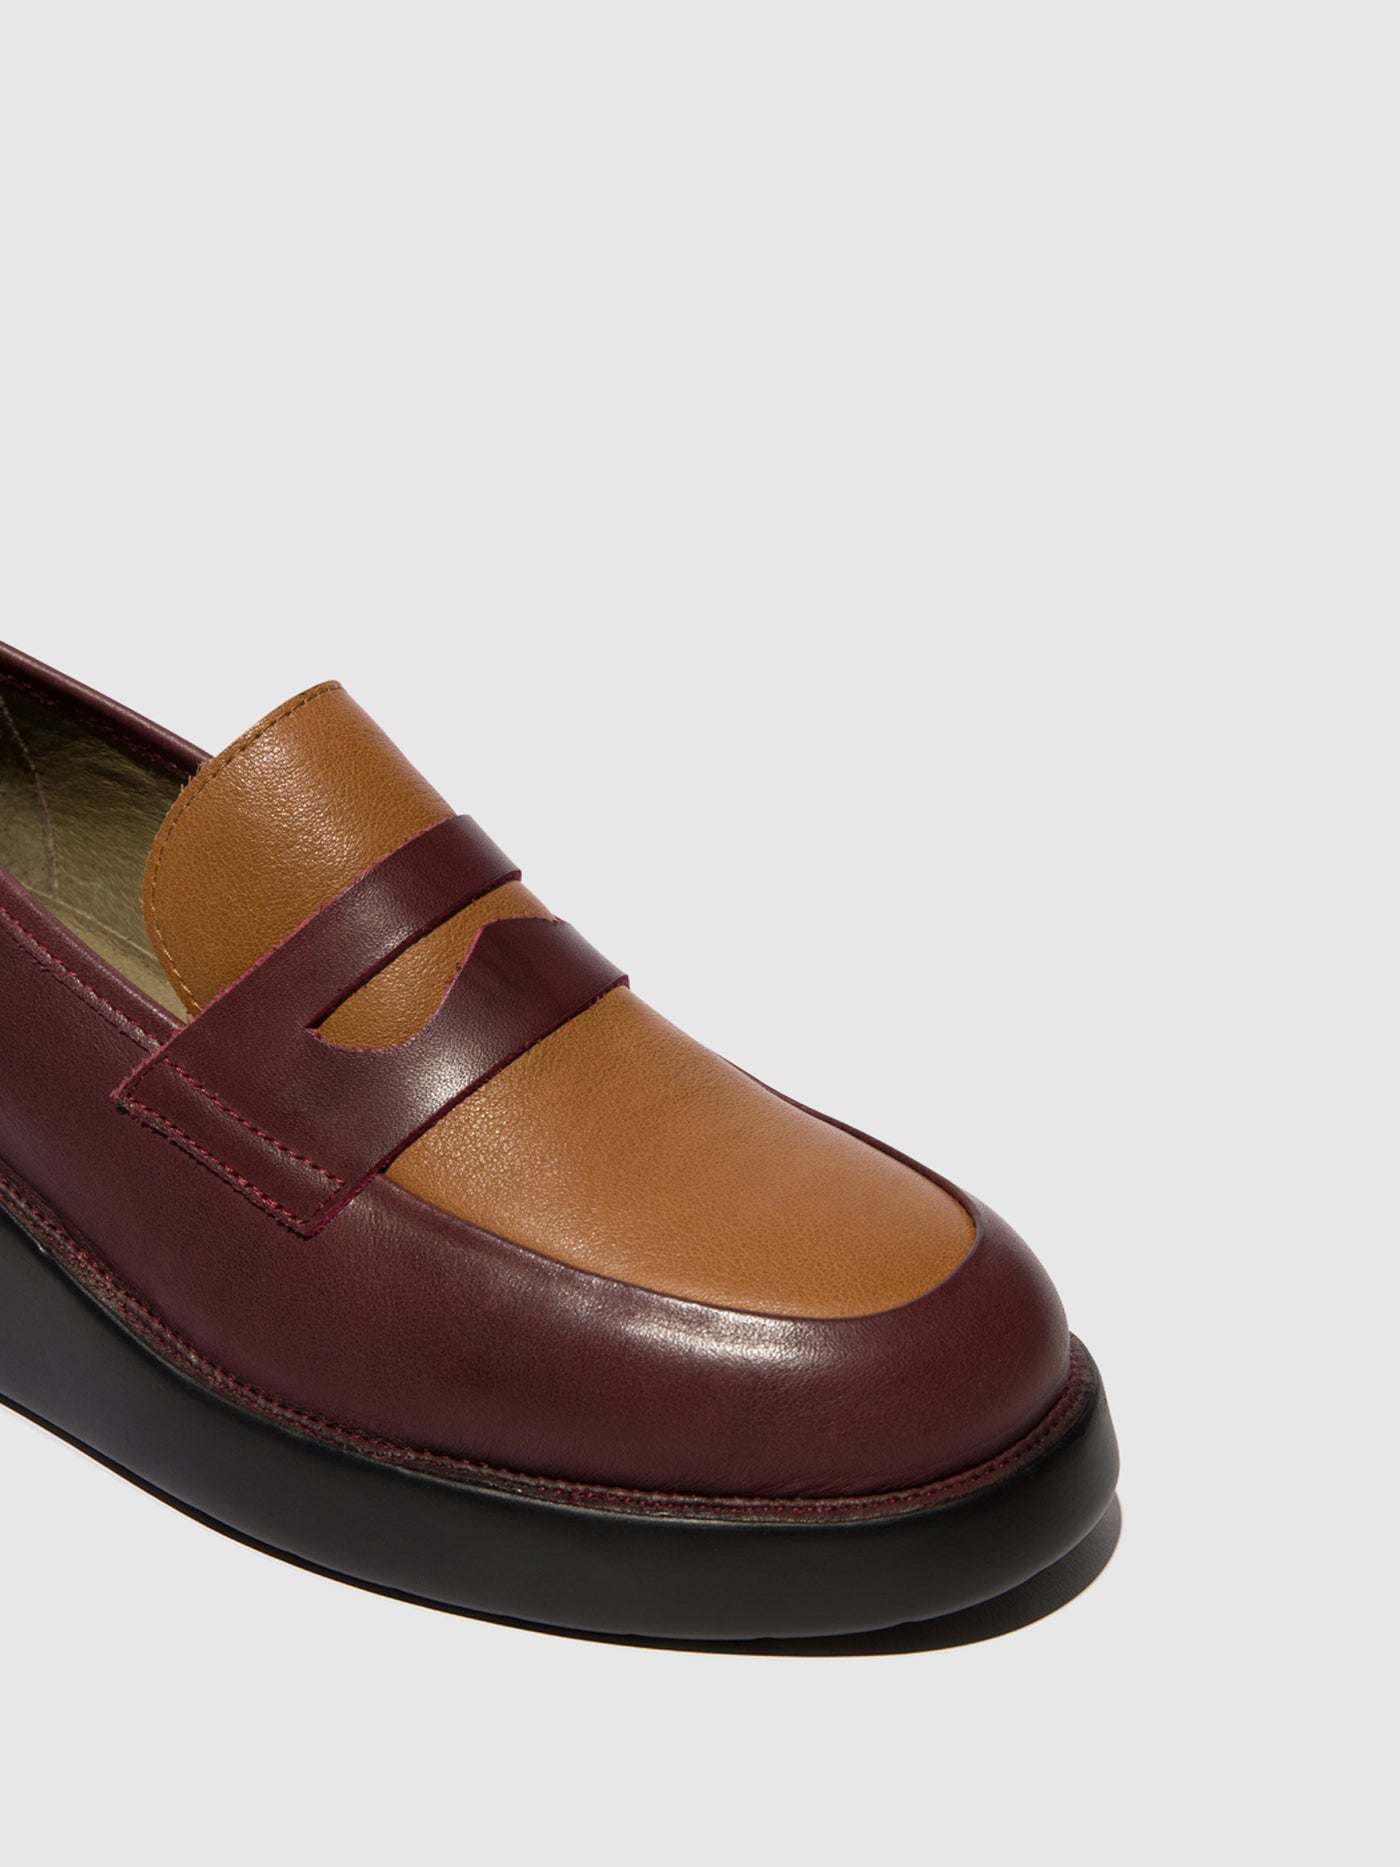 Loafers Shoes BLAR513FLY BORDEAUX/CUOIO